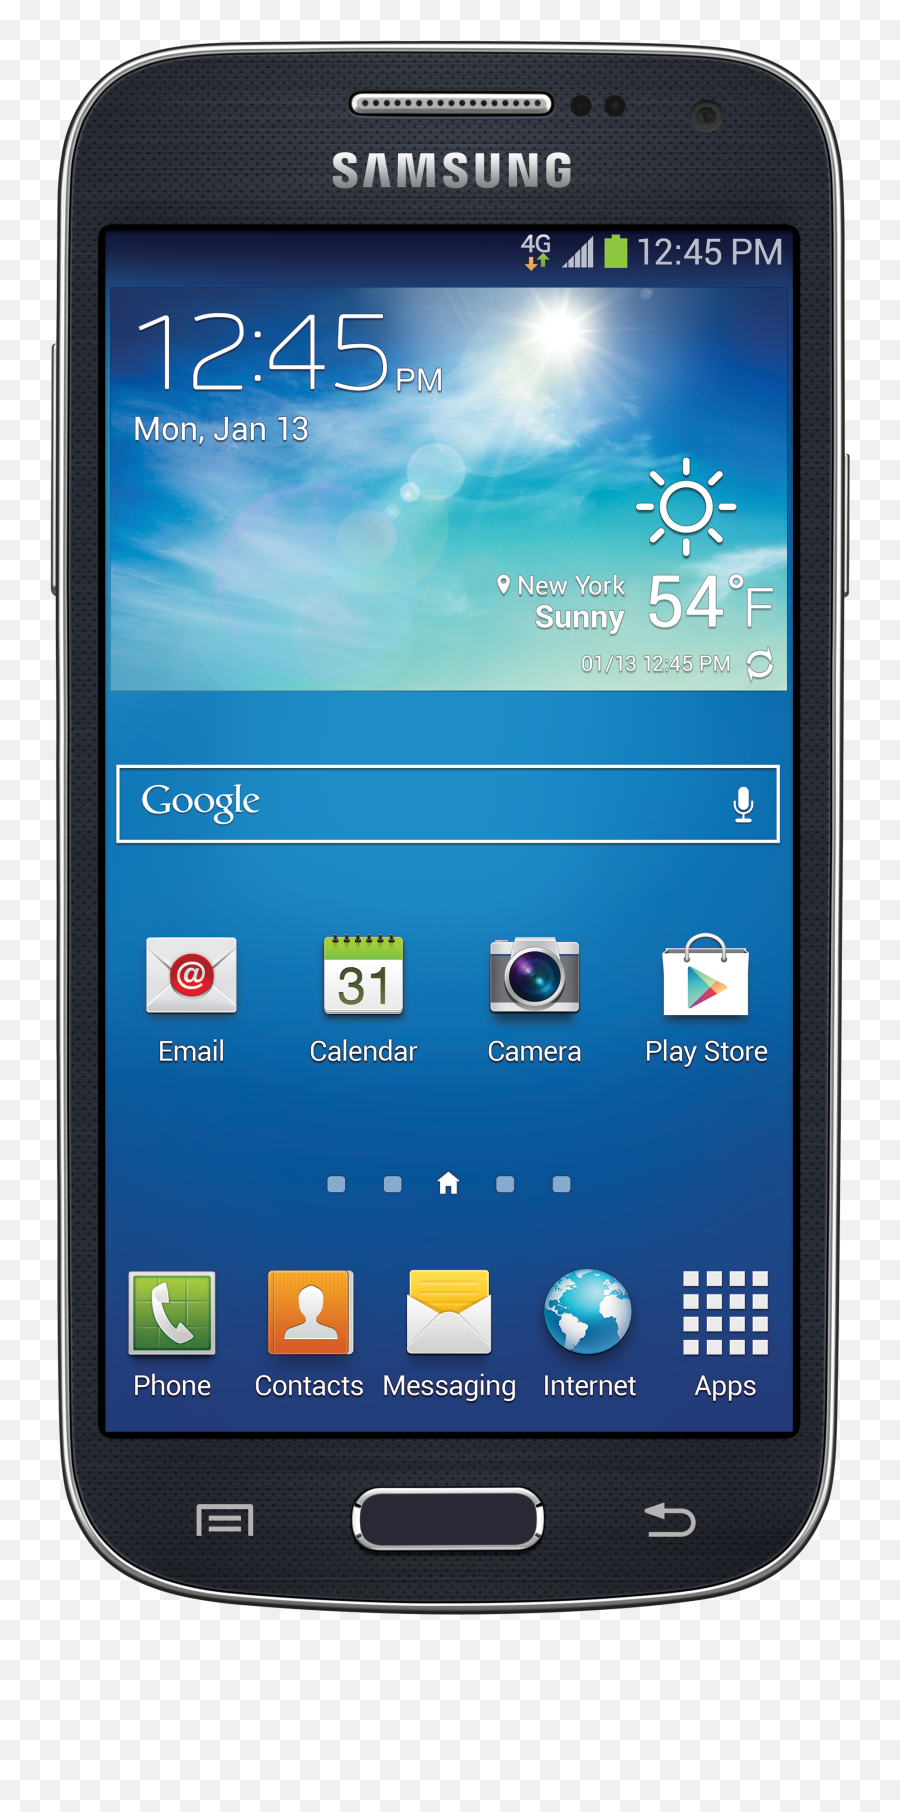 Android Smartphone Png Image - S4 Samsung Price In Pakistan Emoji,Android S4 Galaxy Update The Emojis